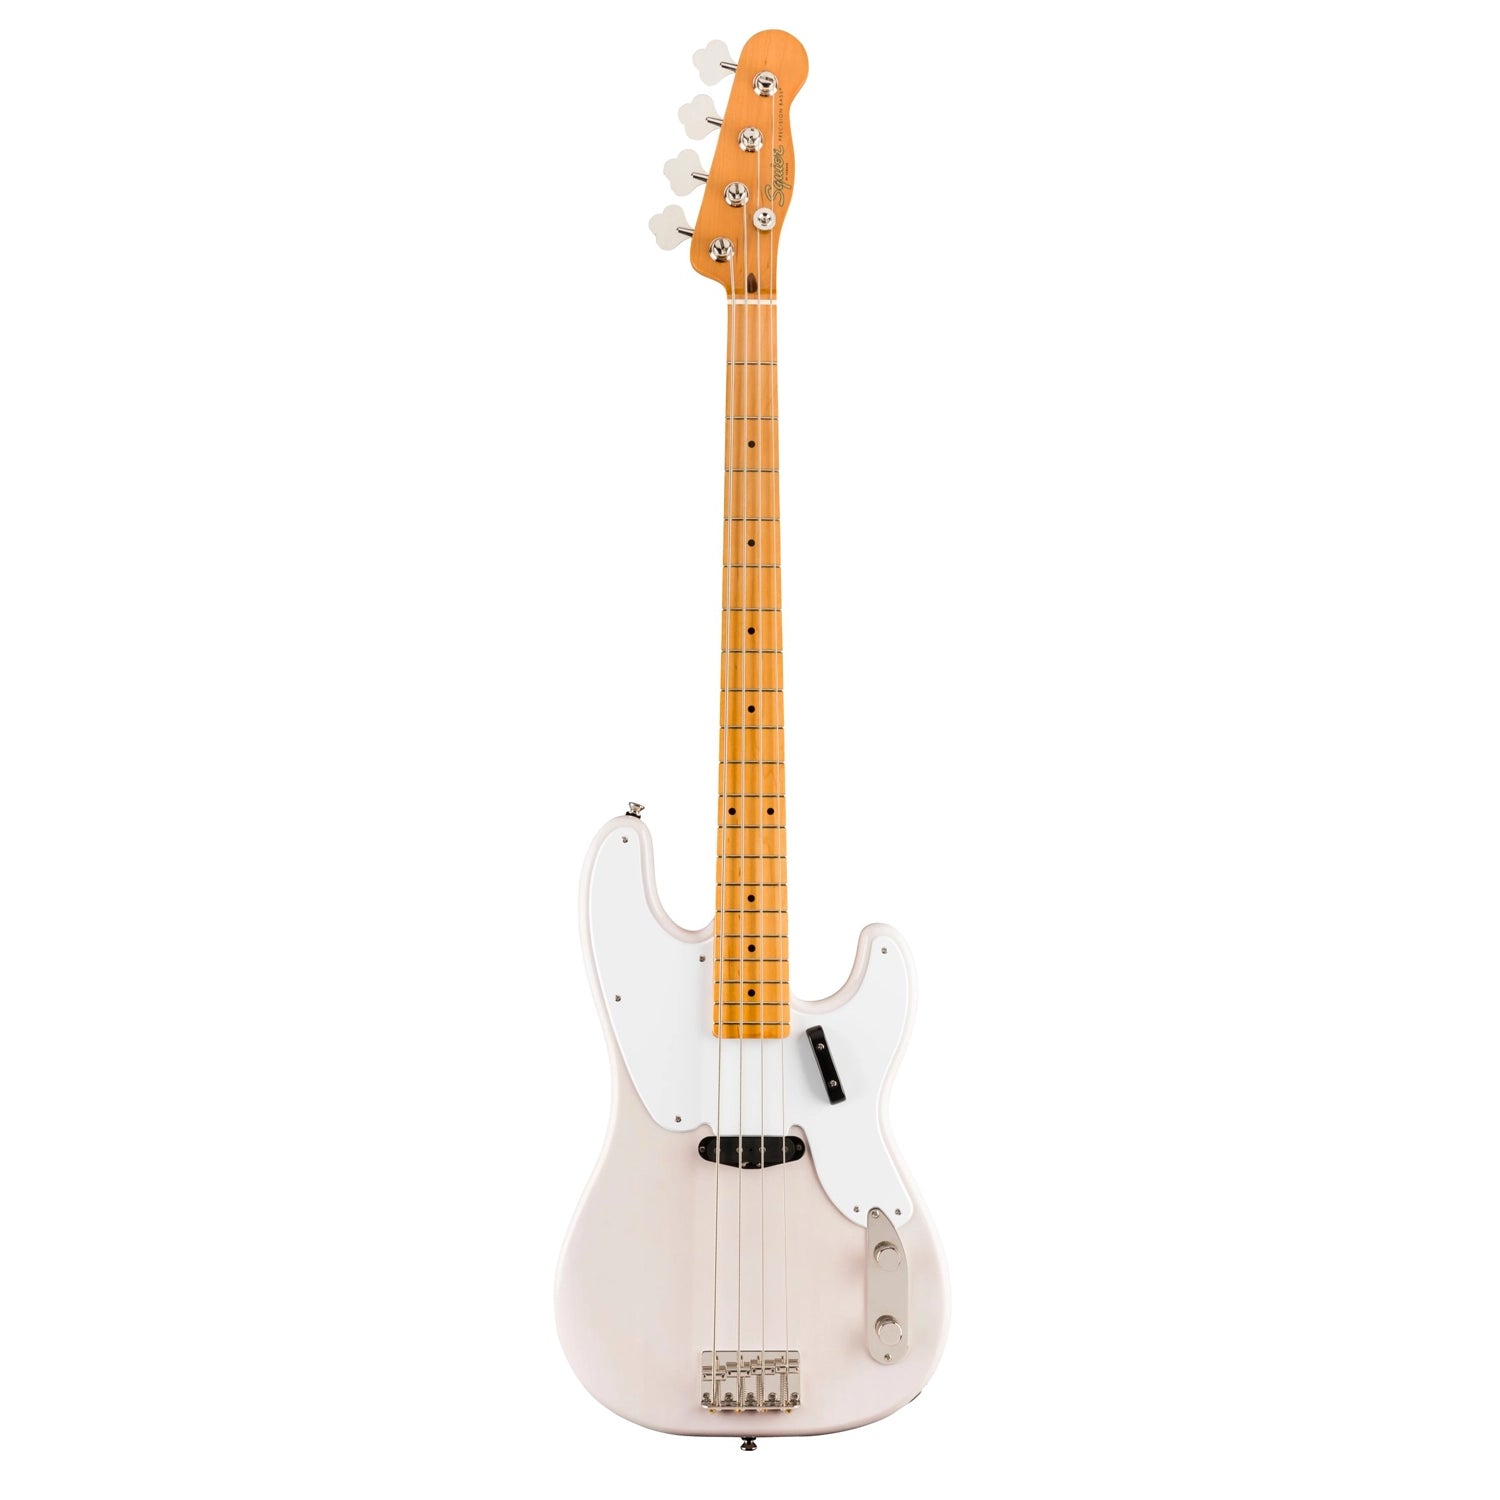 Squier Classic Vibe '50s Precision 4-String Solidbody Bass Guitar - White Blonde